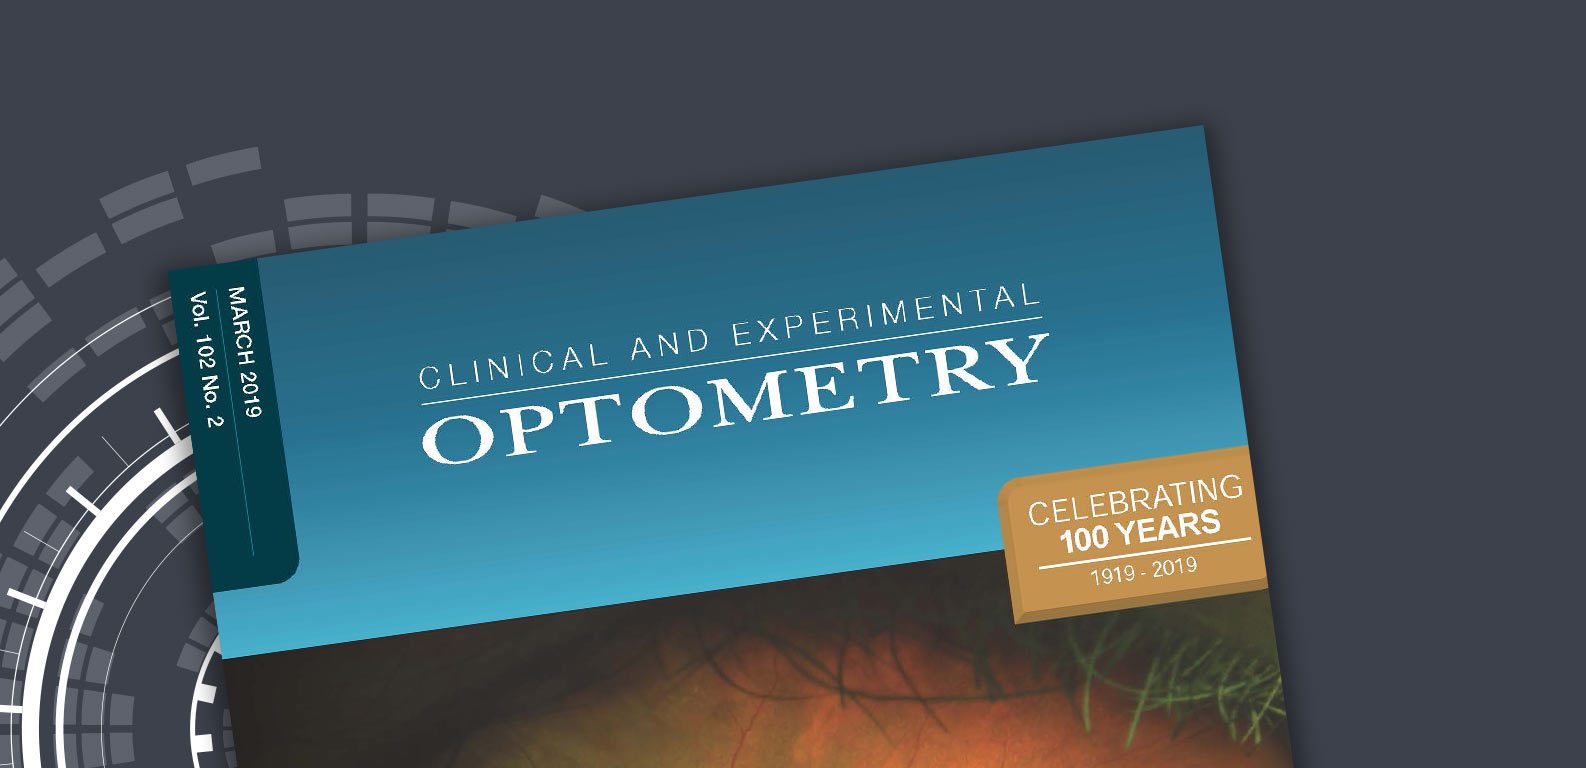 Clinical & Experimental Optometry